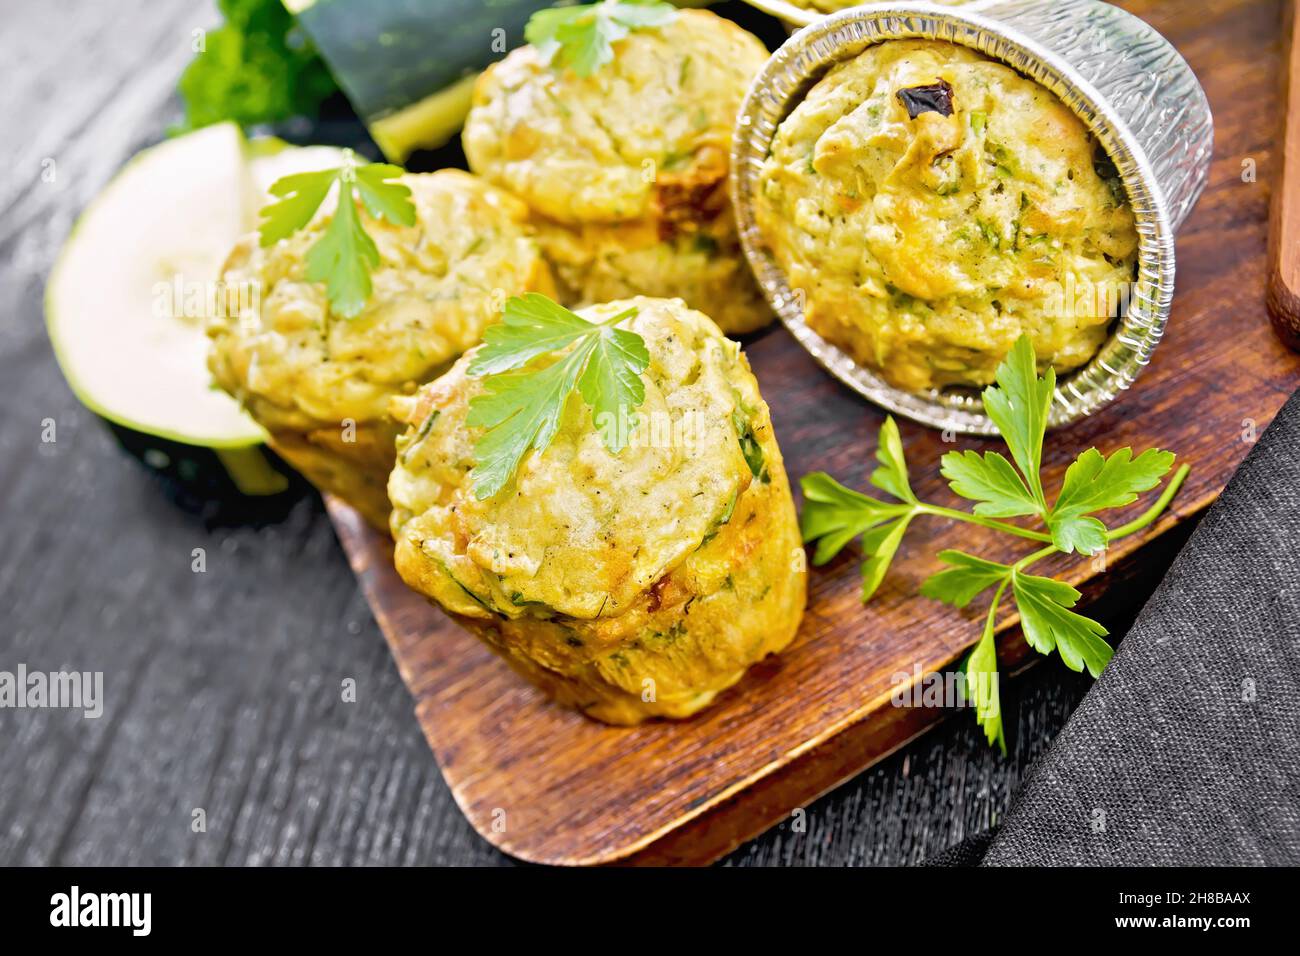 Small cheese and zucchini muffins with herbs, parsley, thyme, knife and a towel on the background of dark wooden board Stock Photo